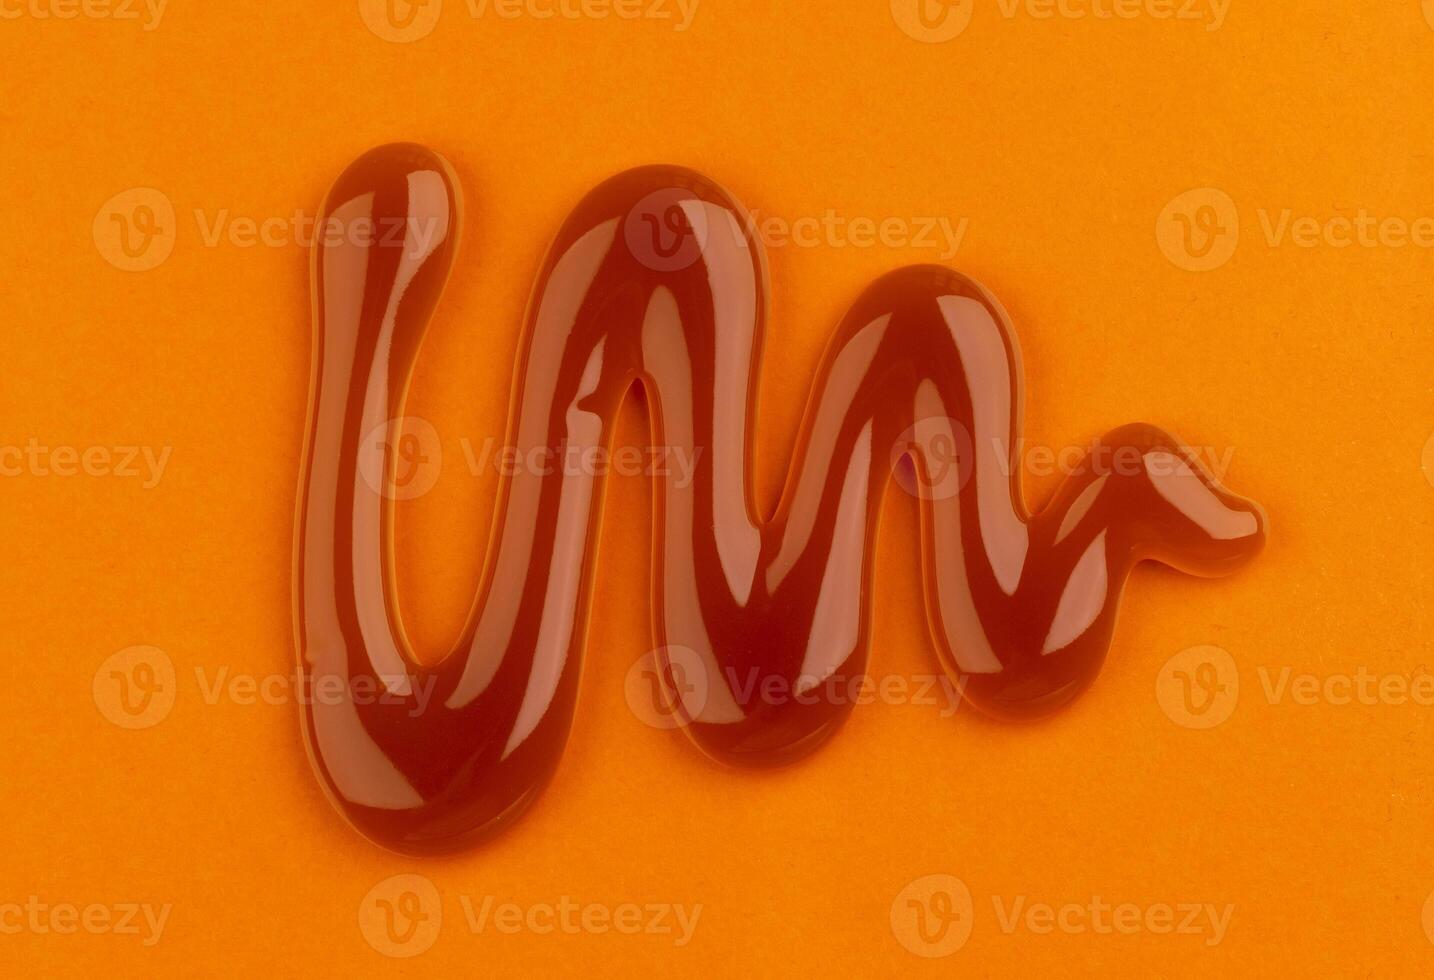 Caramel sauce on orange color background, top view photo